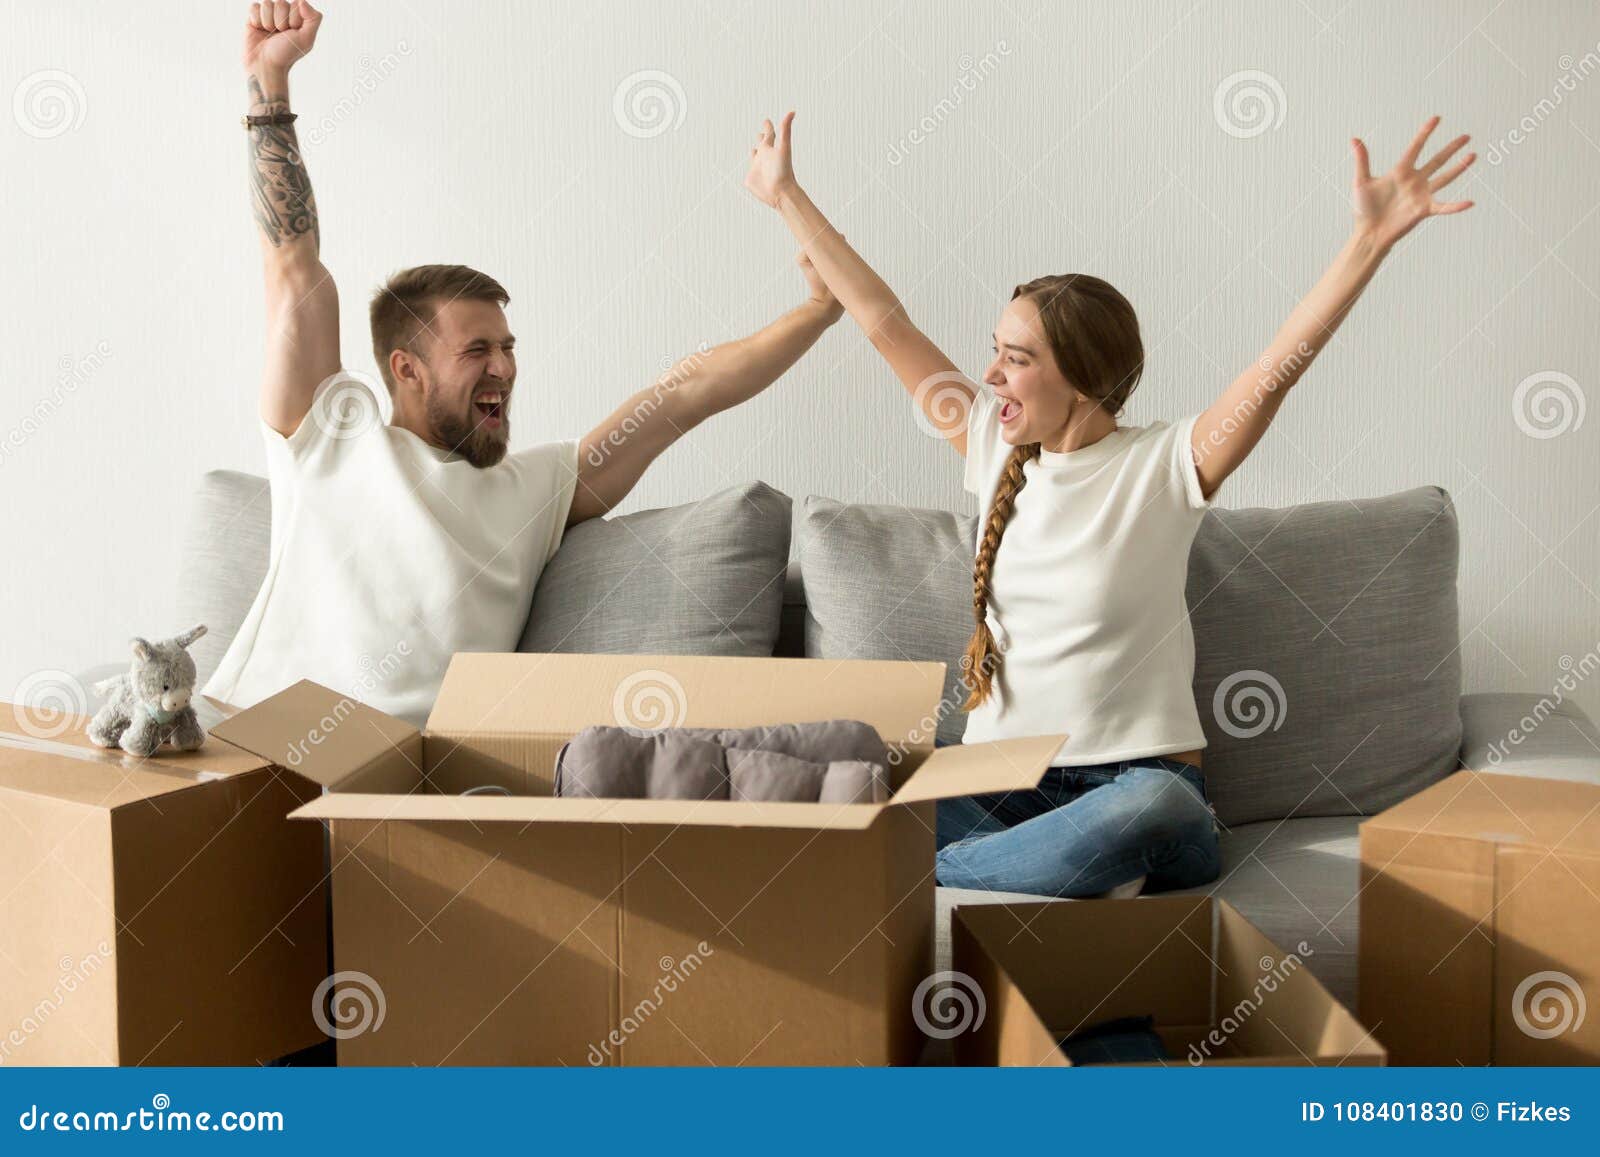 excited couple glad to move into new home celebrating together